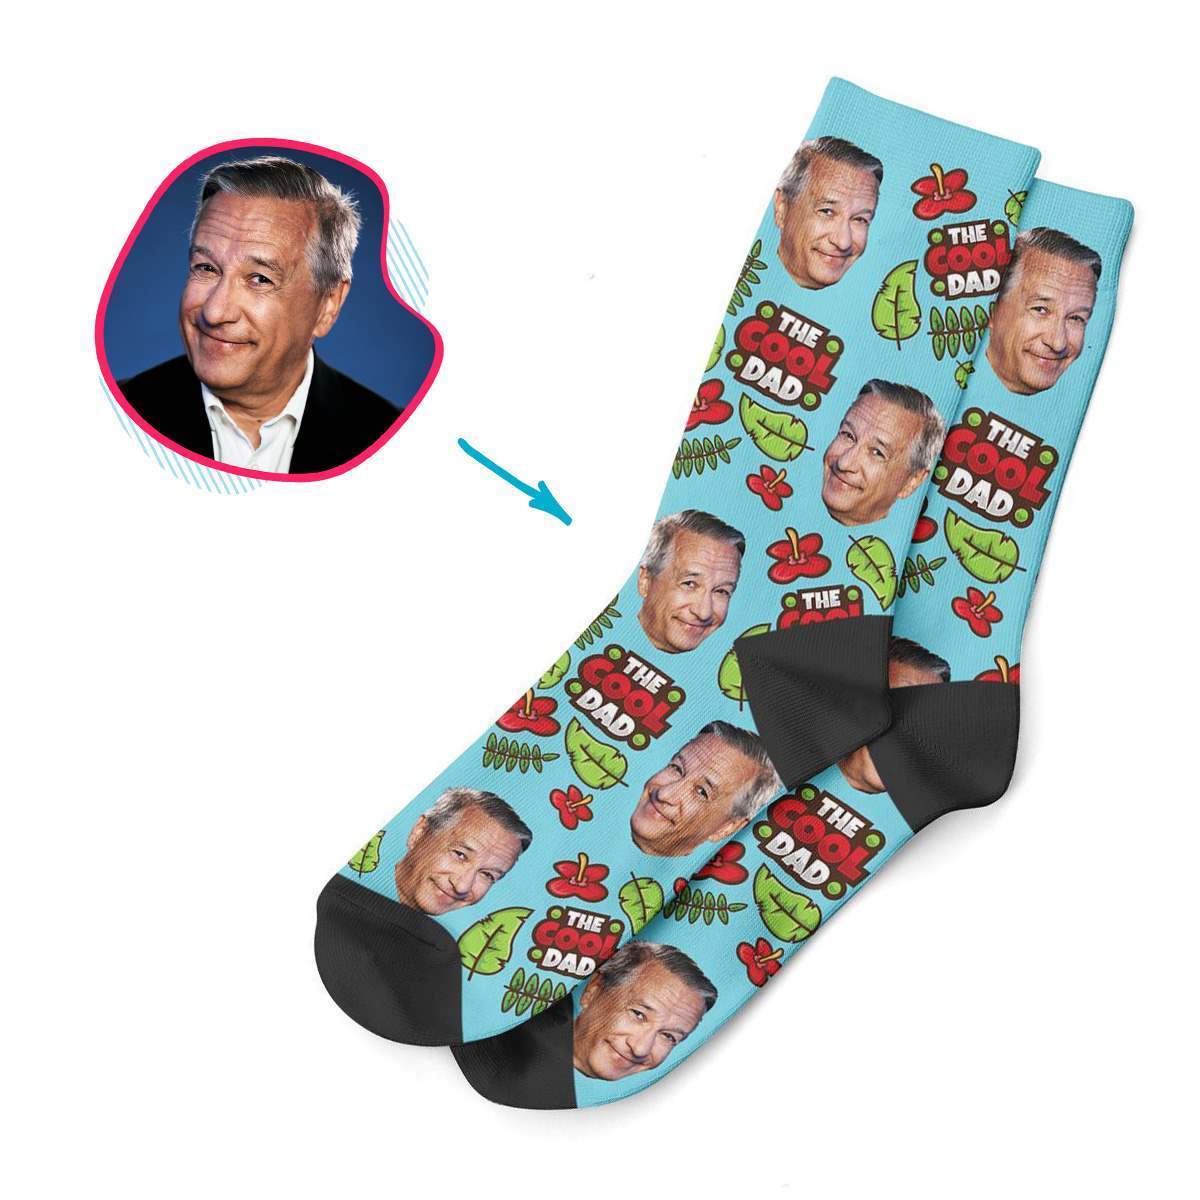 blue The Cool Dad socks personalized with photo of face printed on them